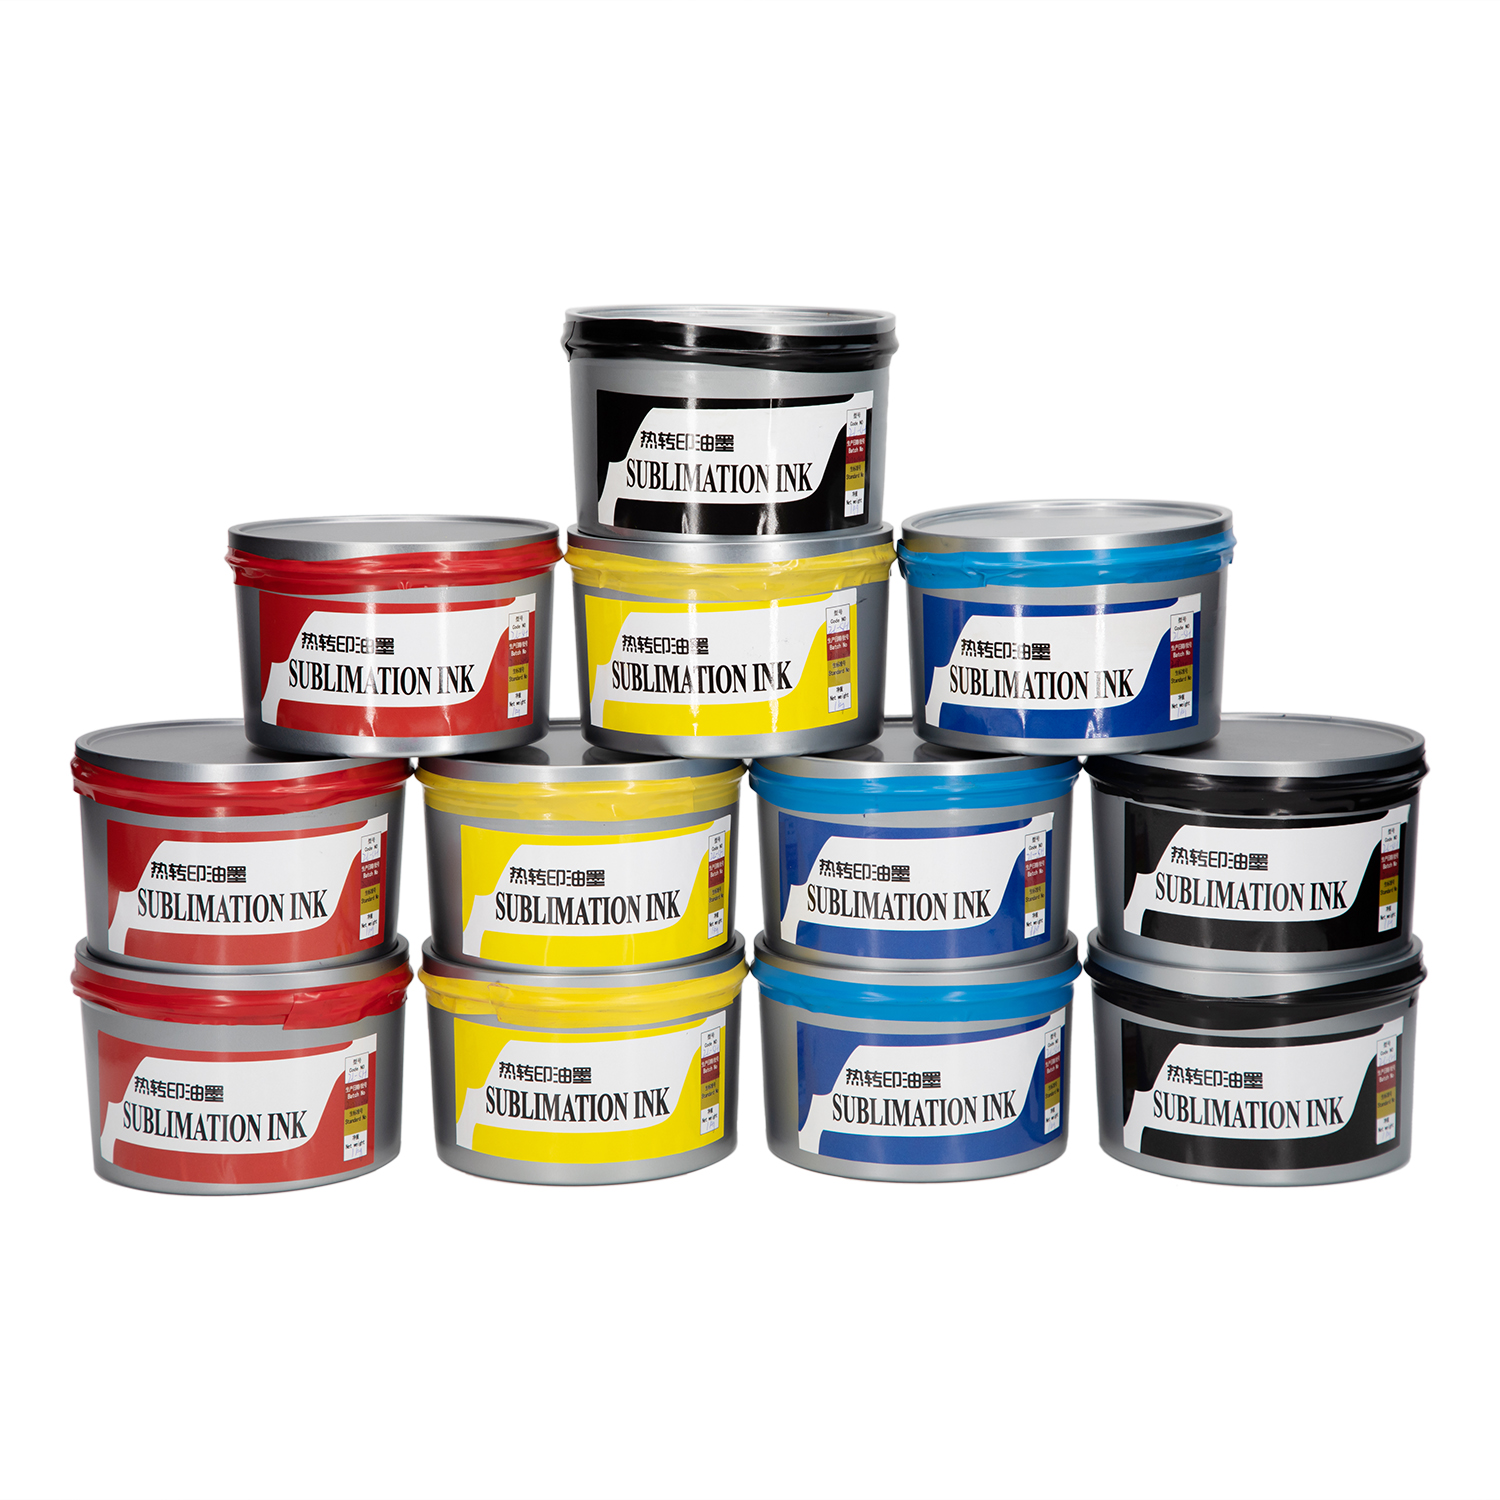 New Formula Hot Sale Offset Sublimation Ink With Lower Prices